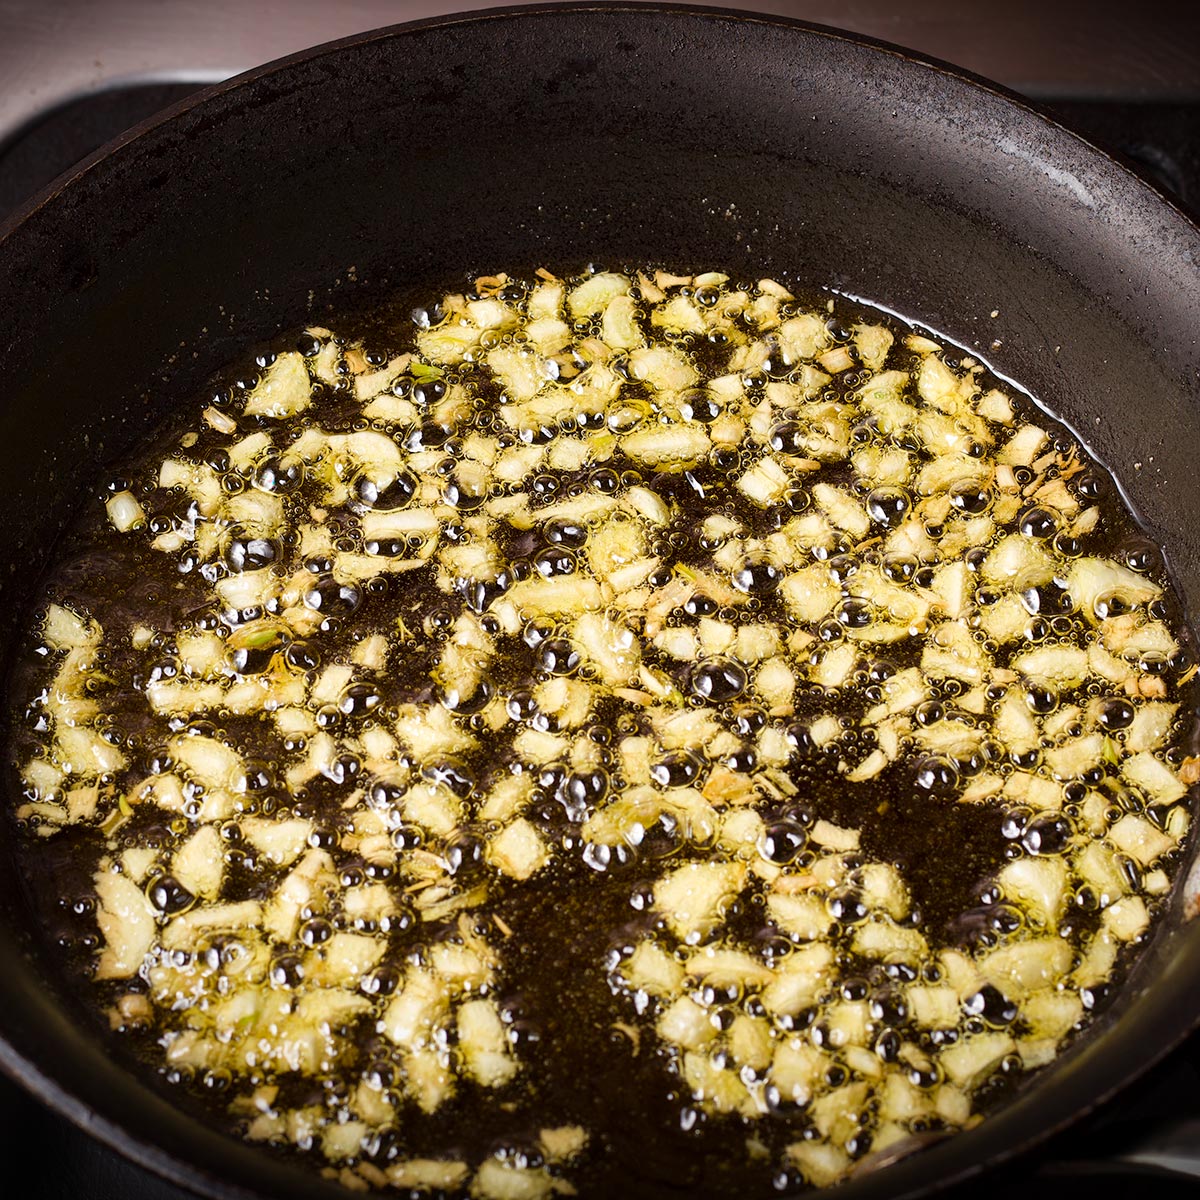 Chopped garlic cooking in hot oil in a small skillet.